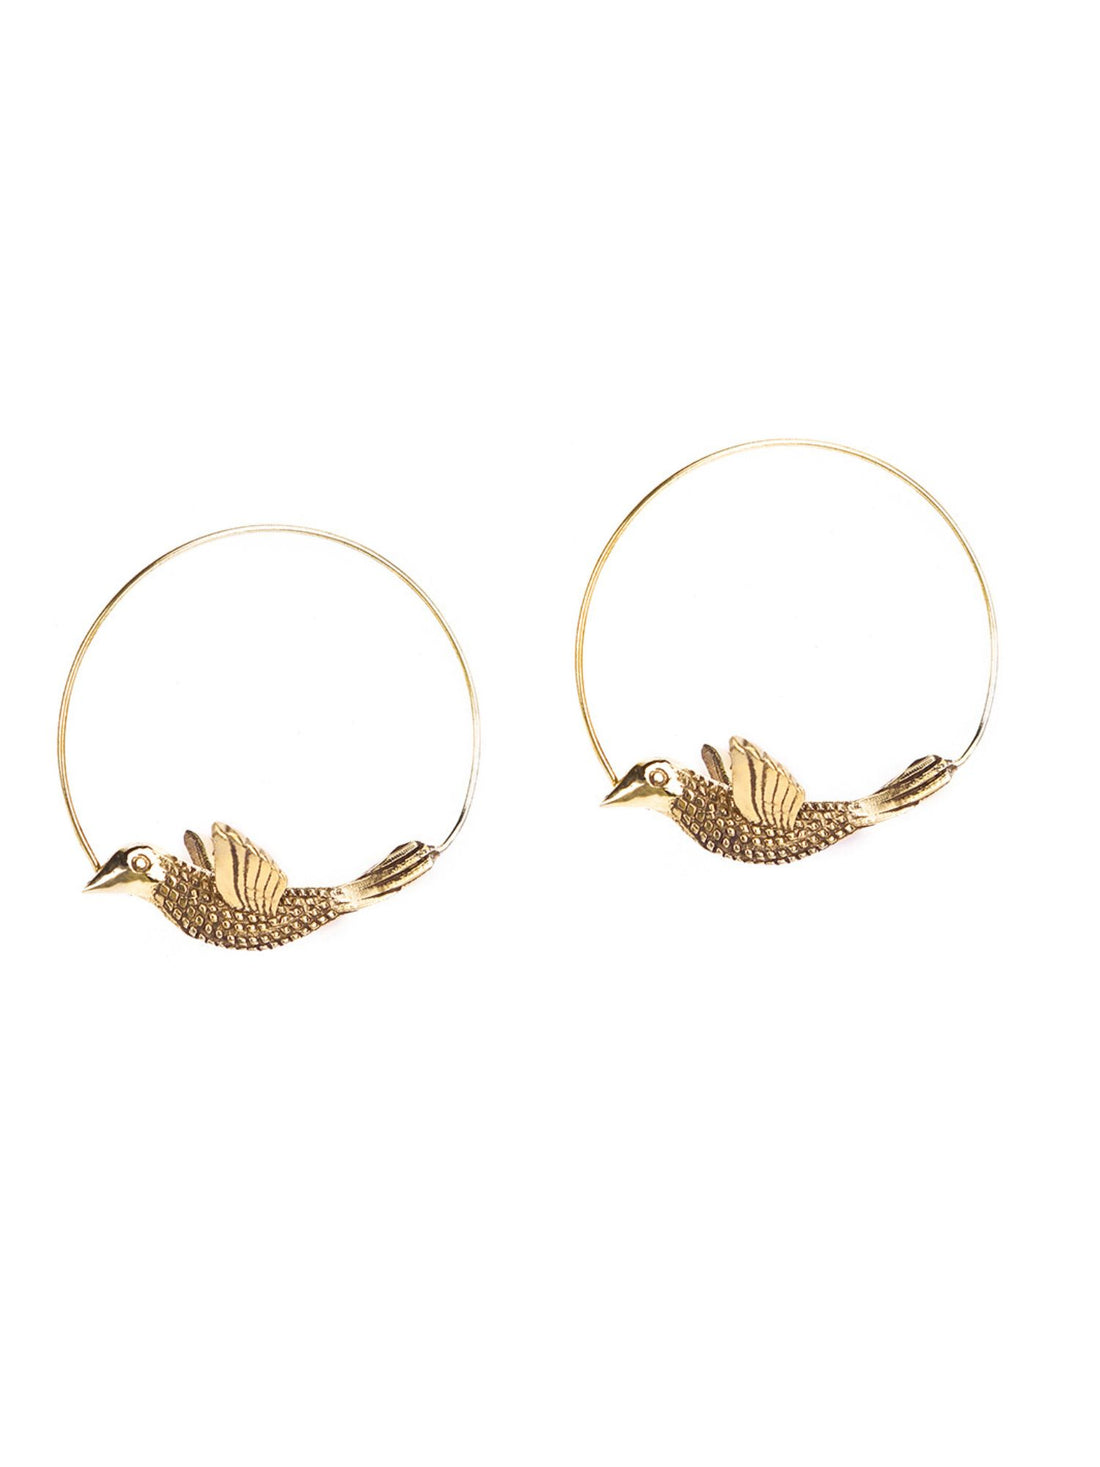 Party Wear Hoops Earrings - Statement Gold and Silver-Plated Brass Earrings By Studio One Love